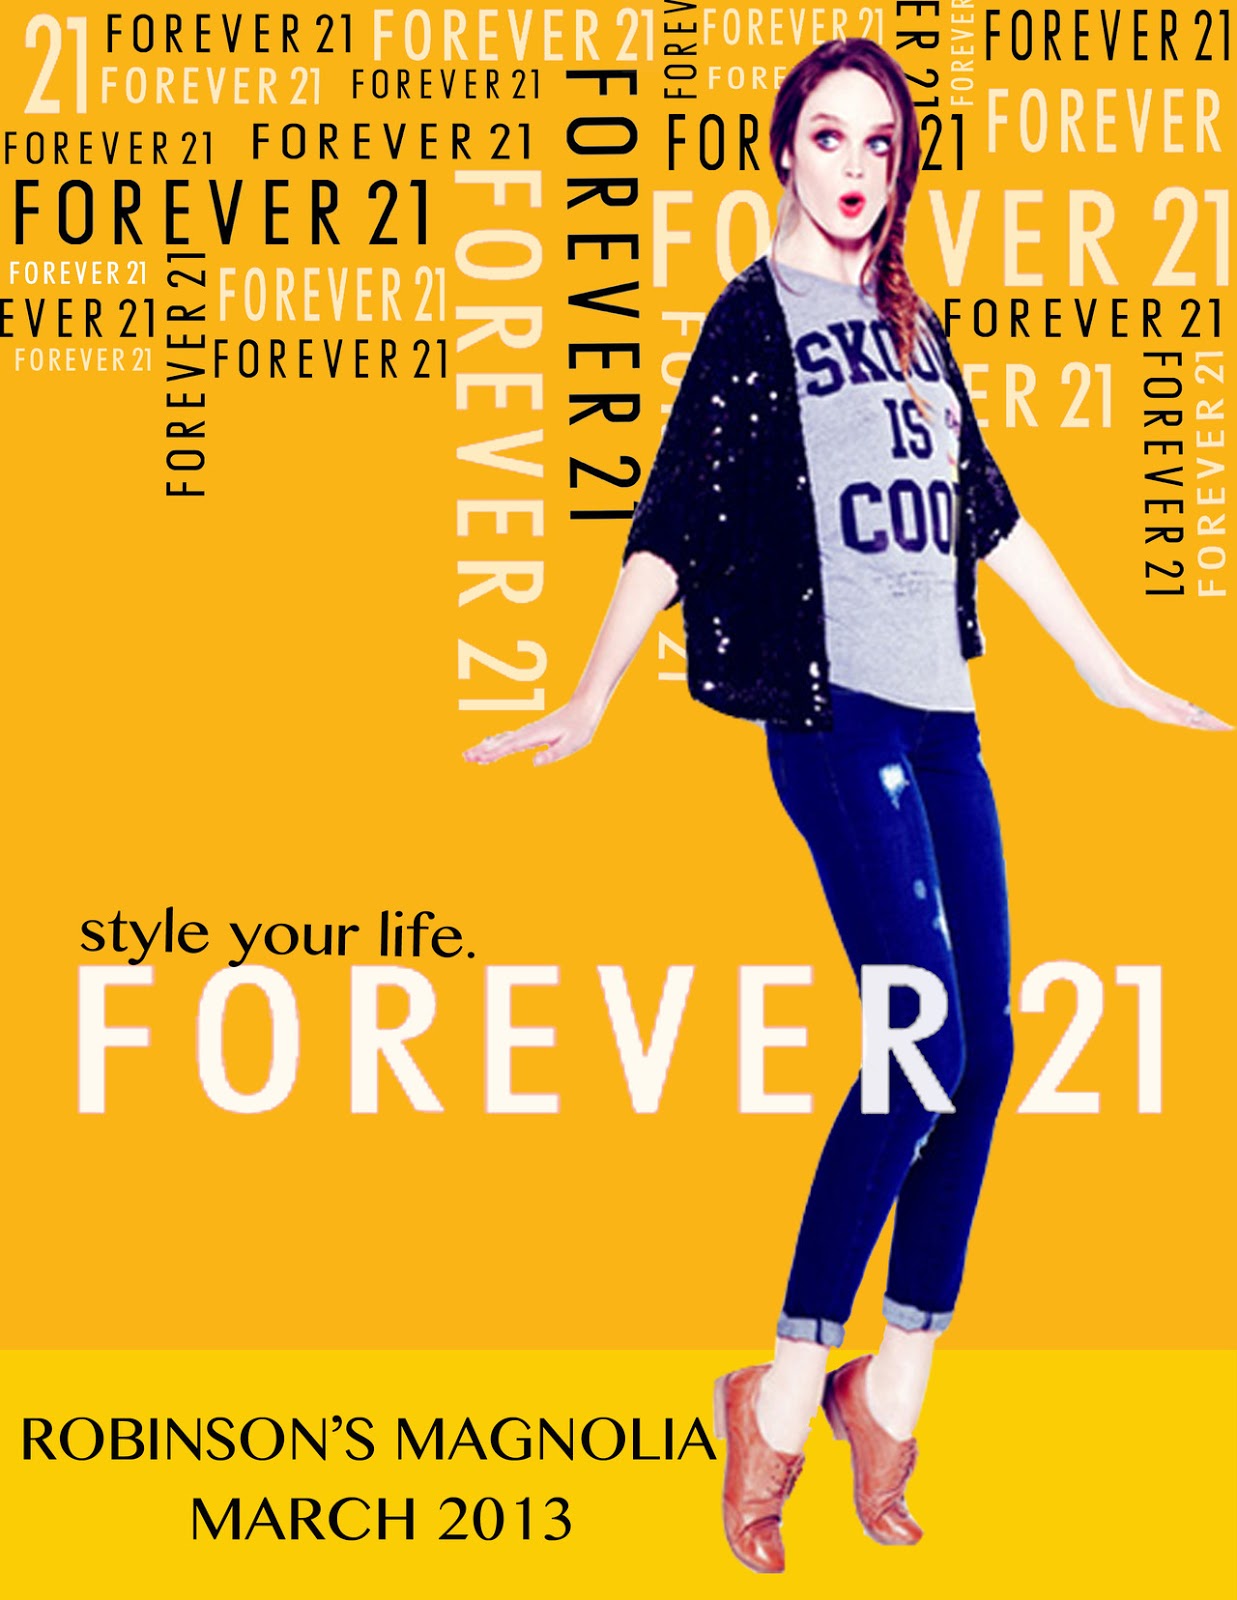 Advertising Copy Layout and Writing: Forever 21 mock ad